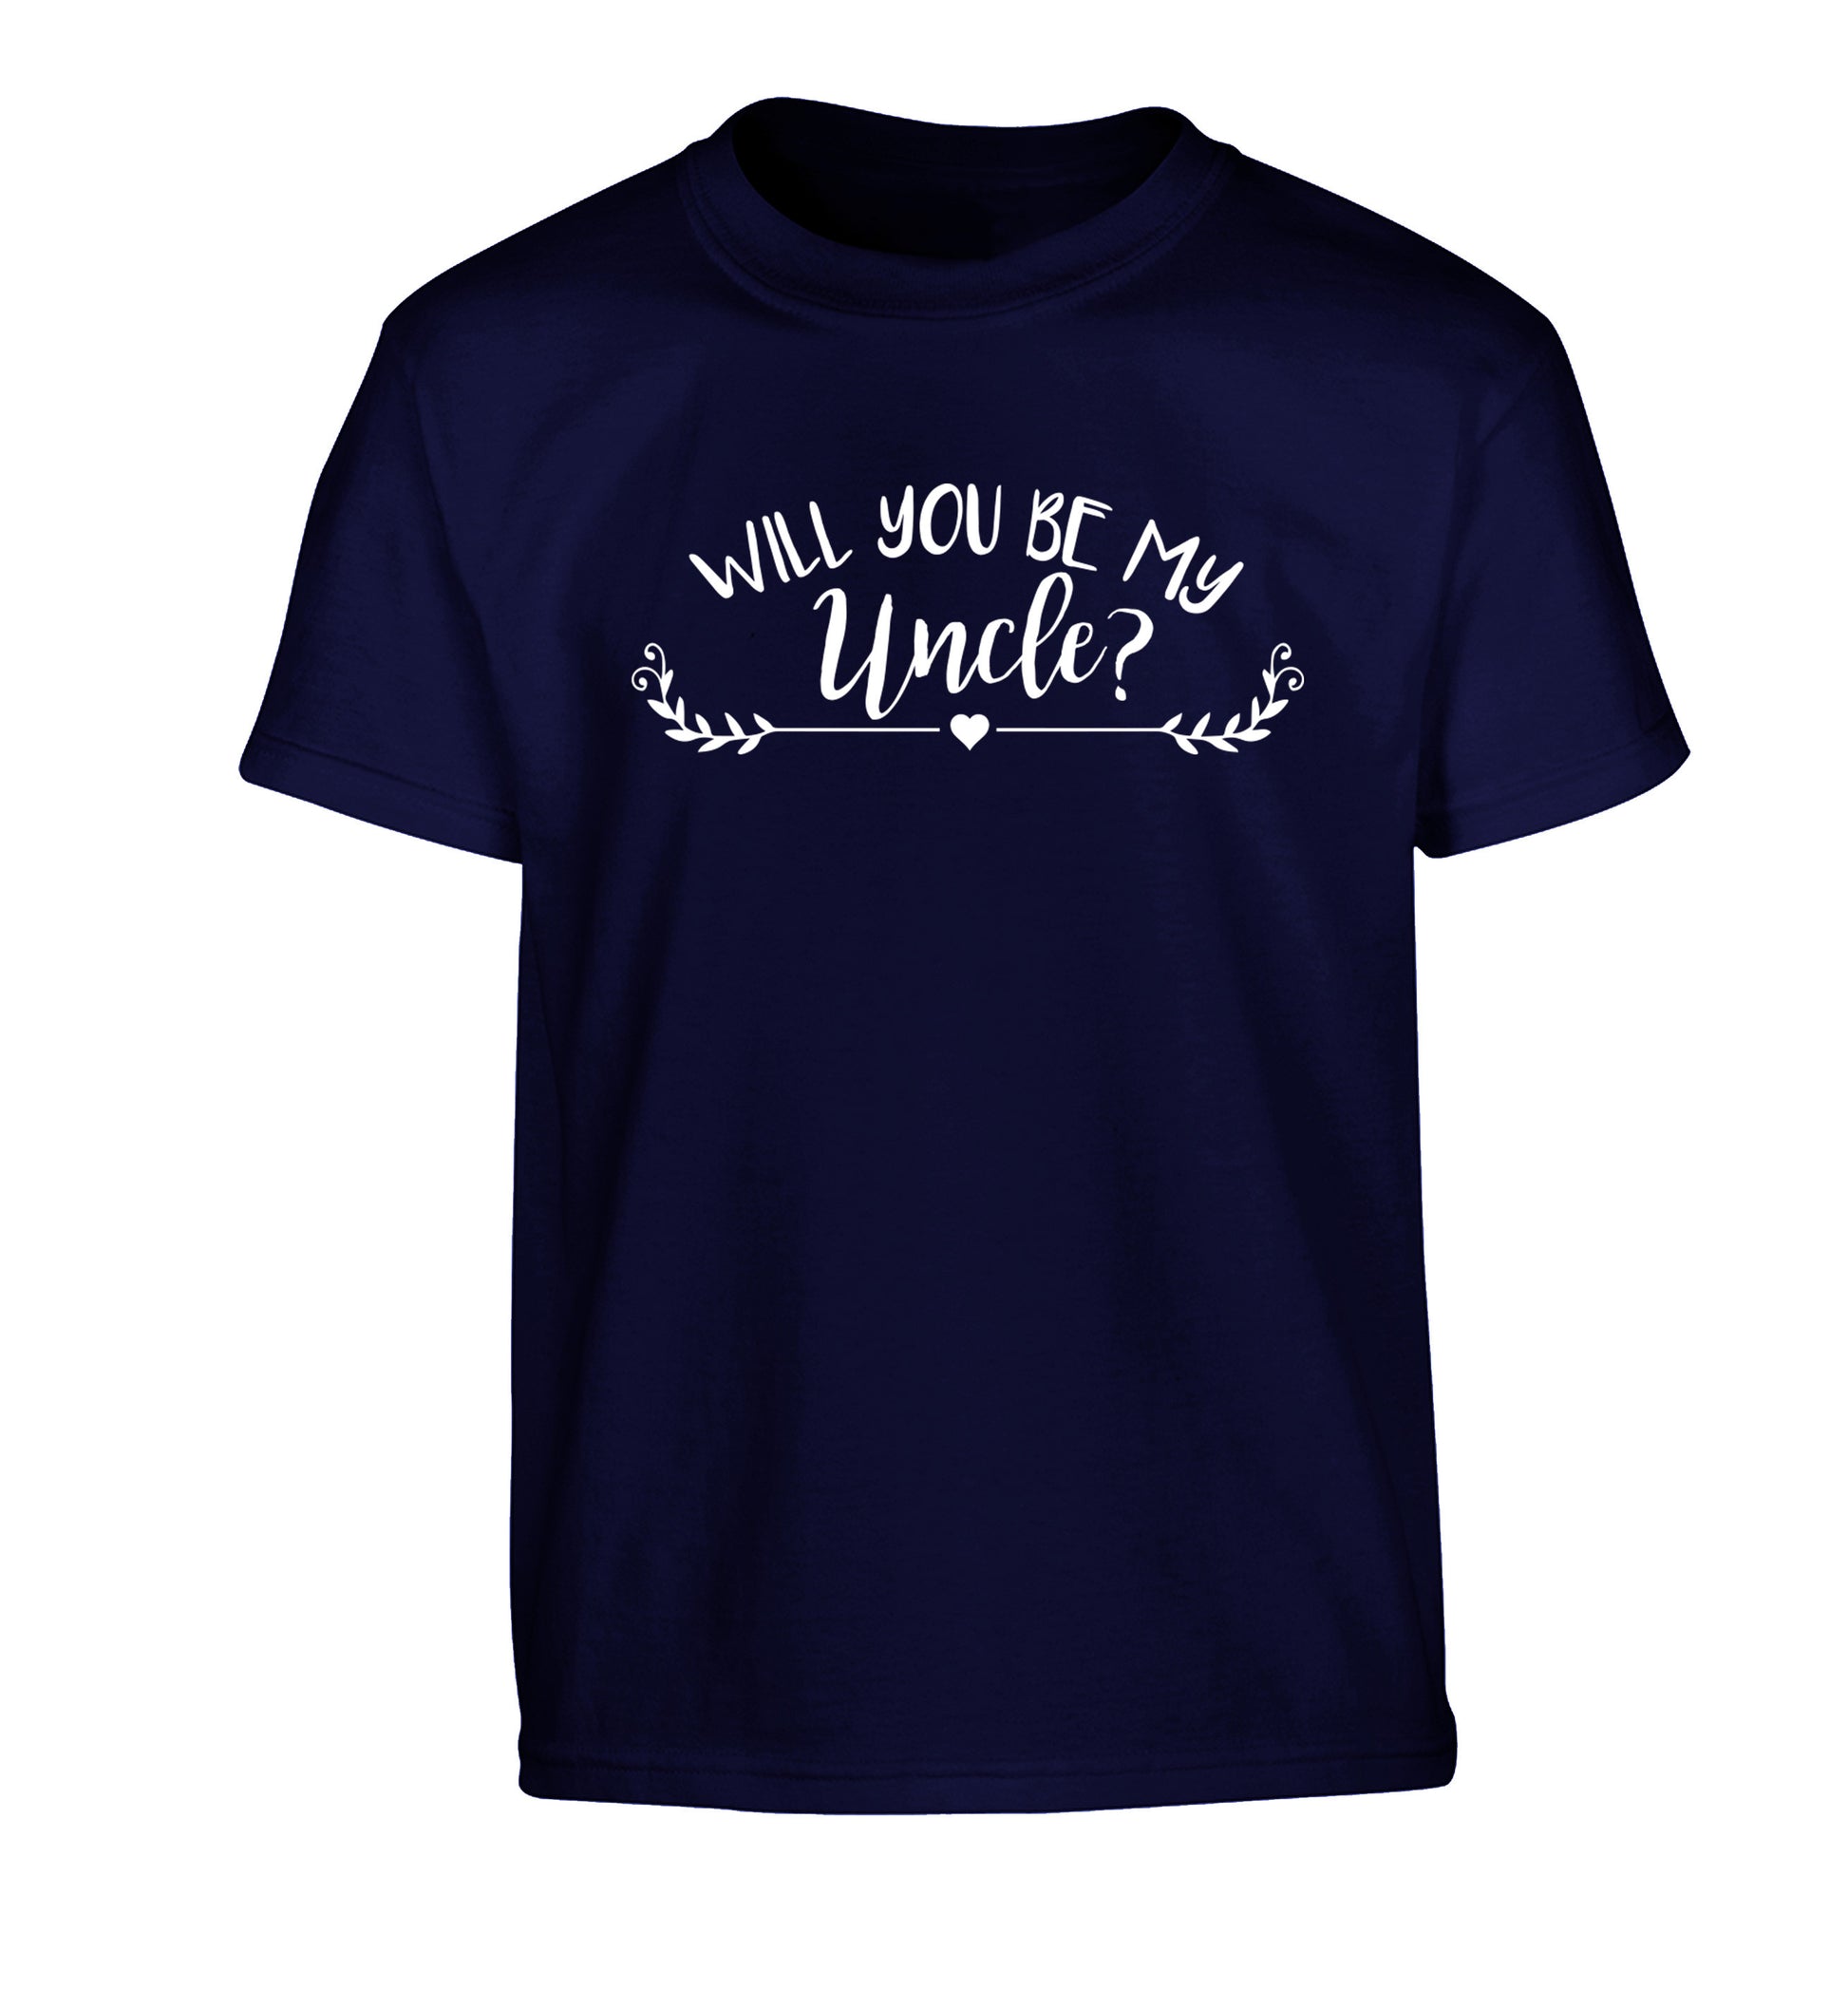 Will you be my uncle? Children's navy Tshirt 12-14 Years